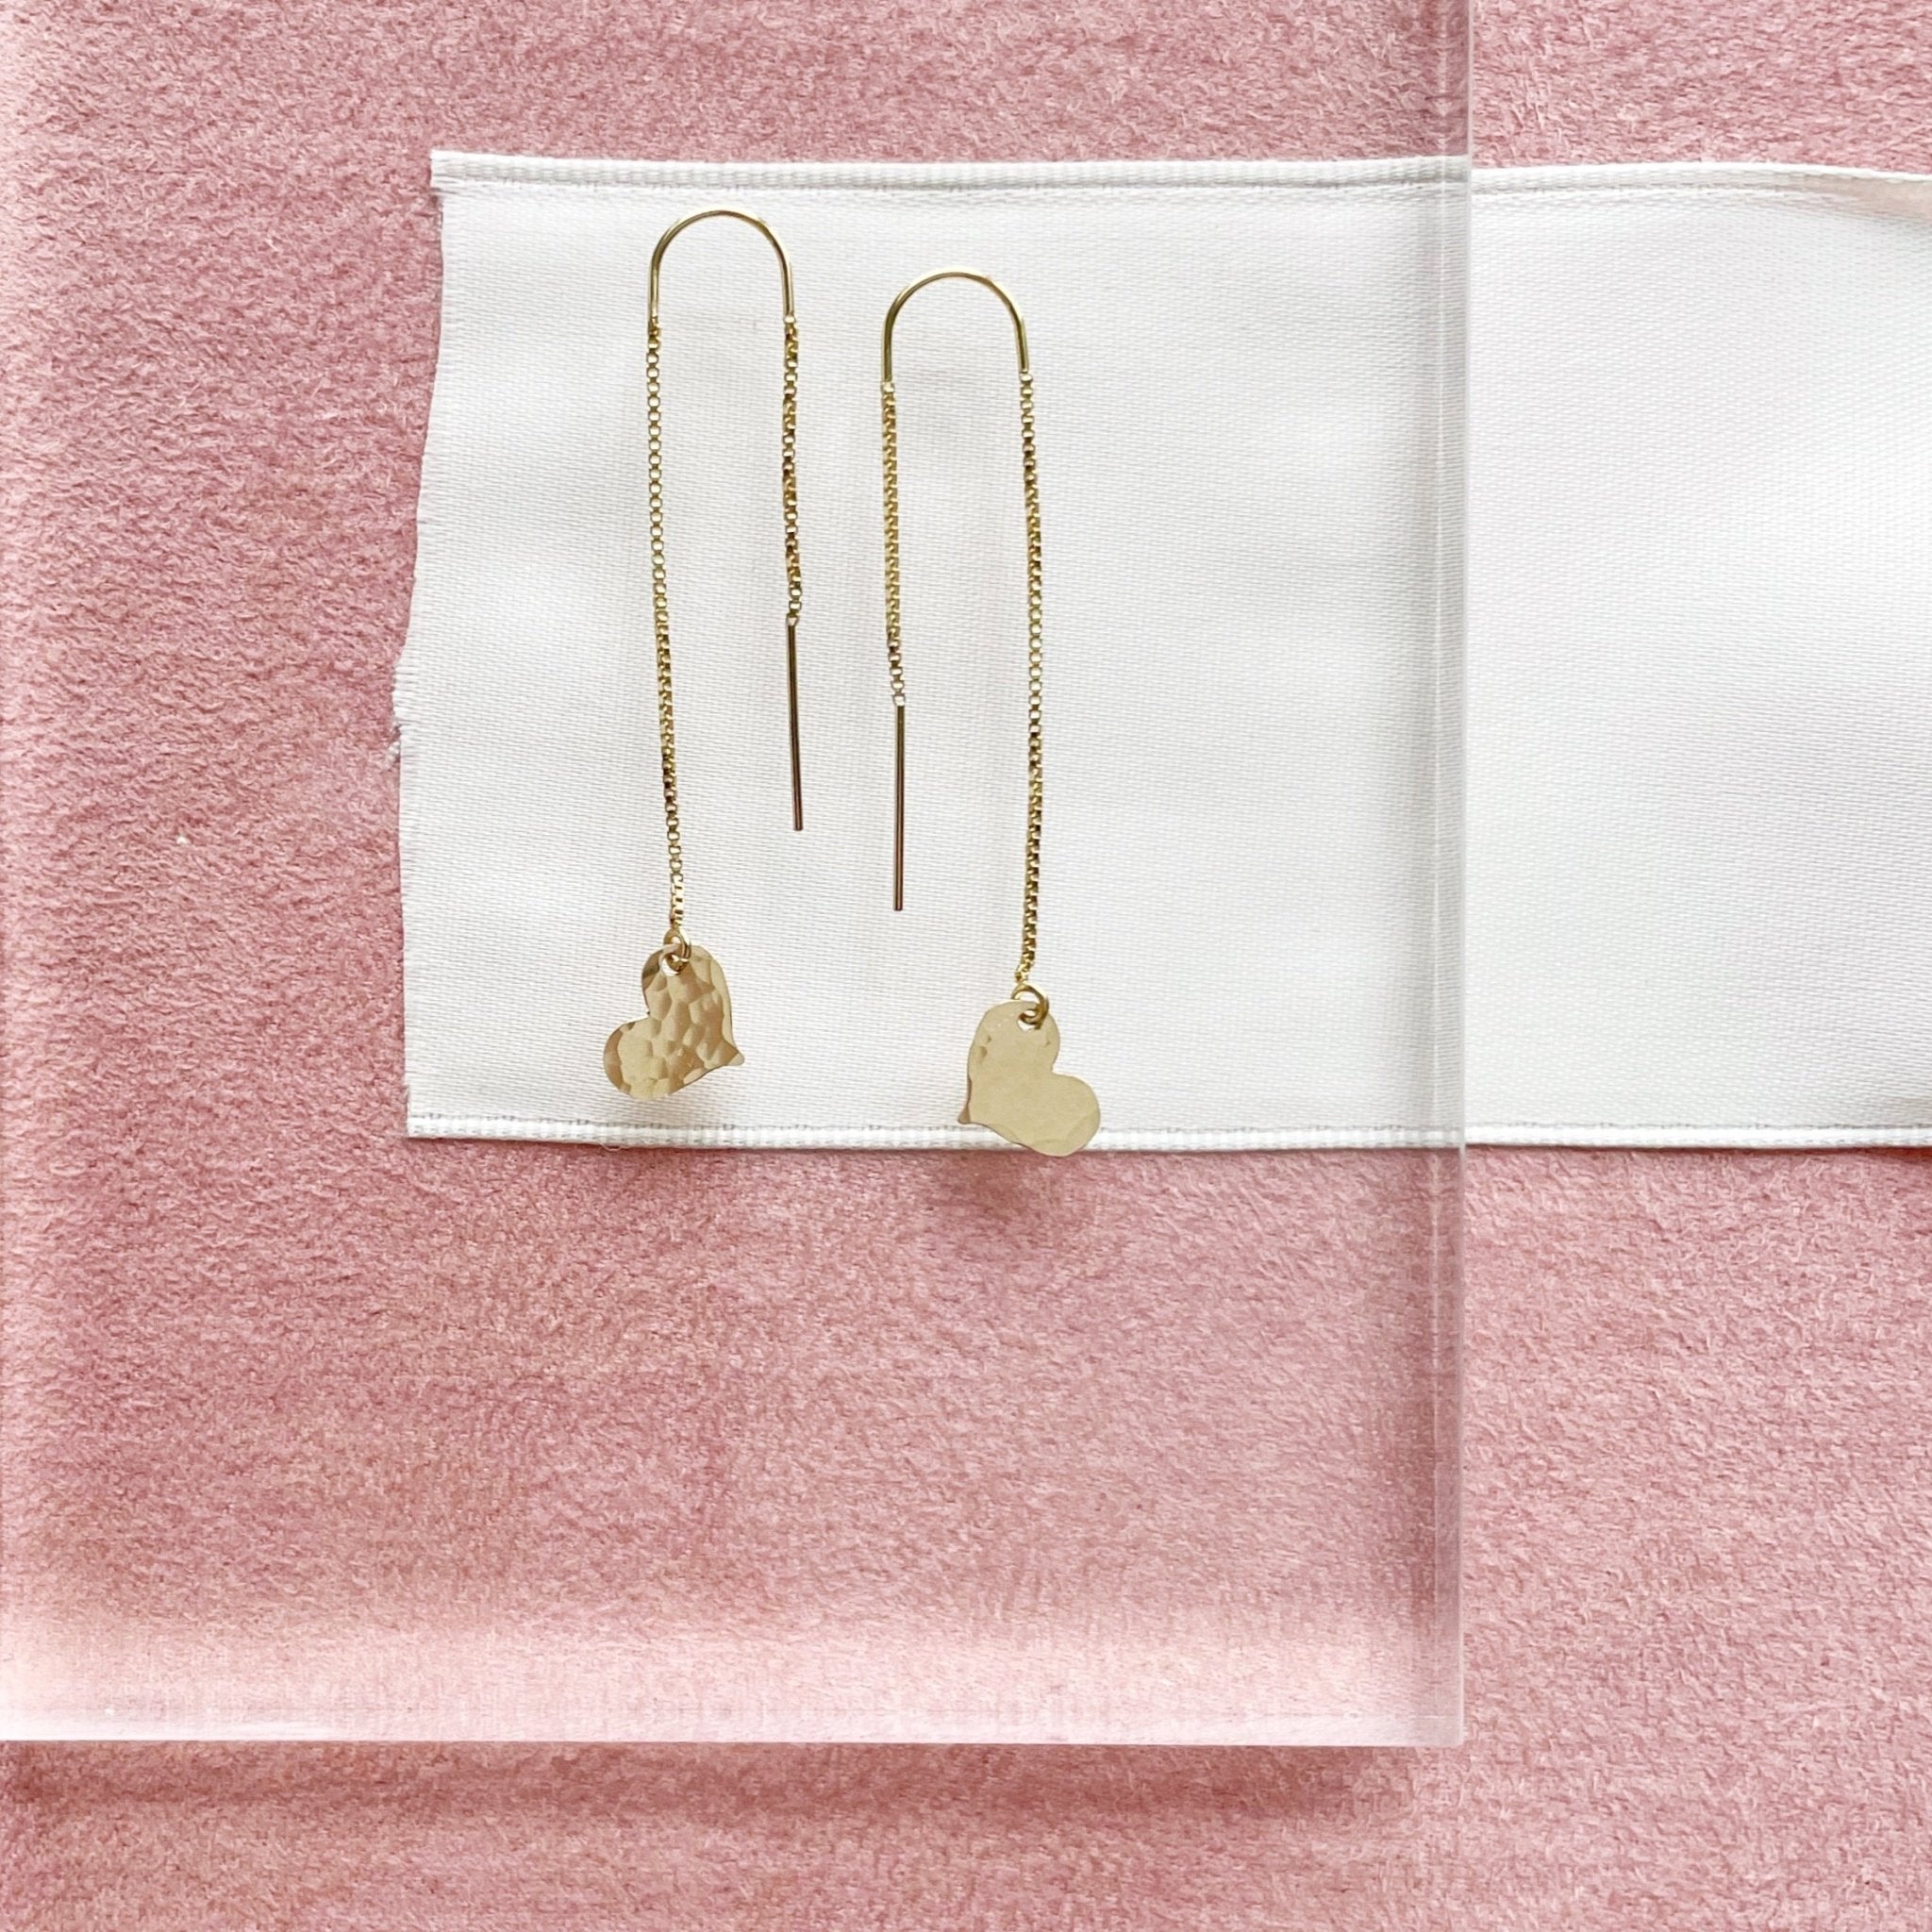 Gold chain threader earrings with a 2.25 inch drop and a tiny textured gold heart at the bottom. Darling Earrings by Sarah Cornwell Jewelry